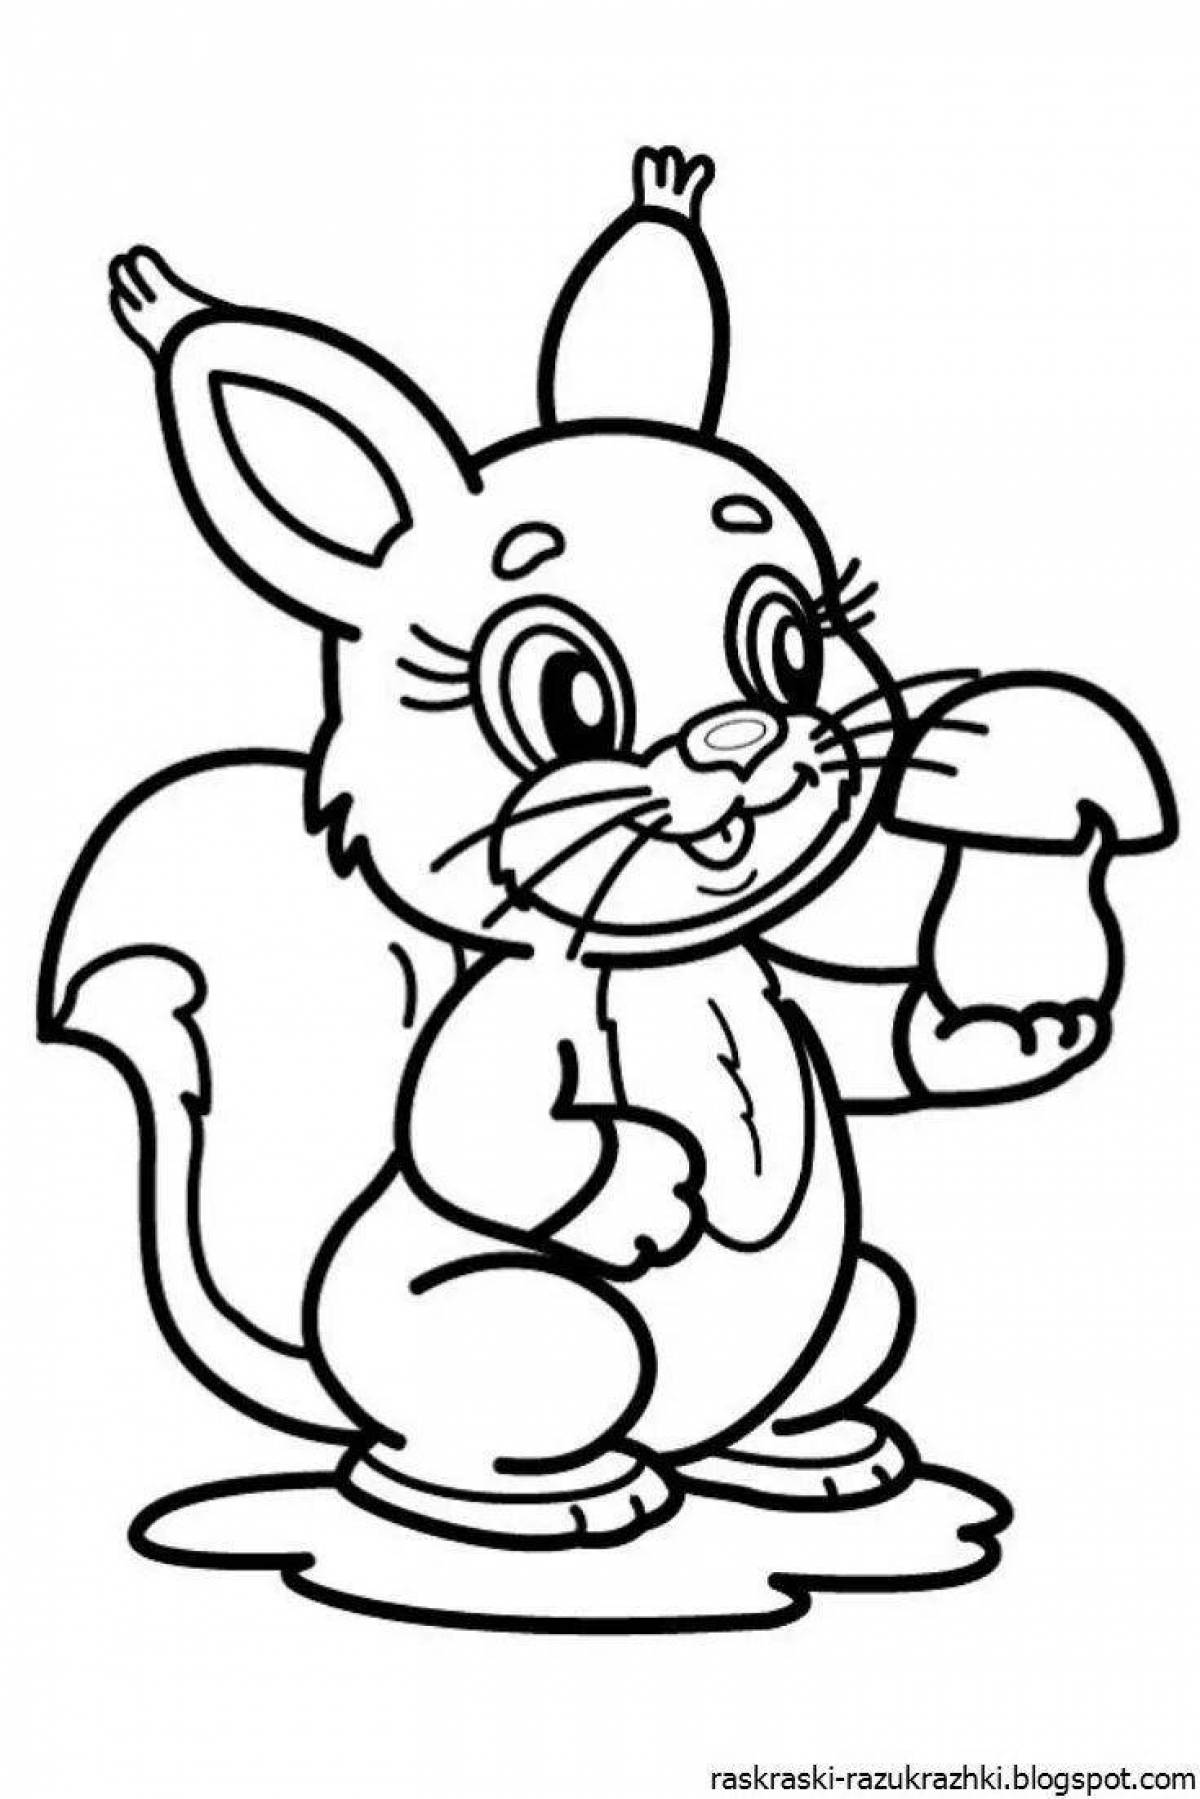 Coloring book cheerful hare for children 6-7 years old